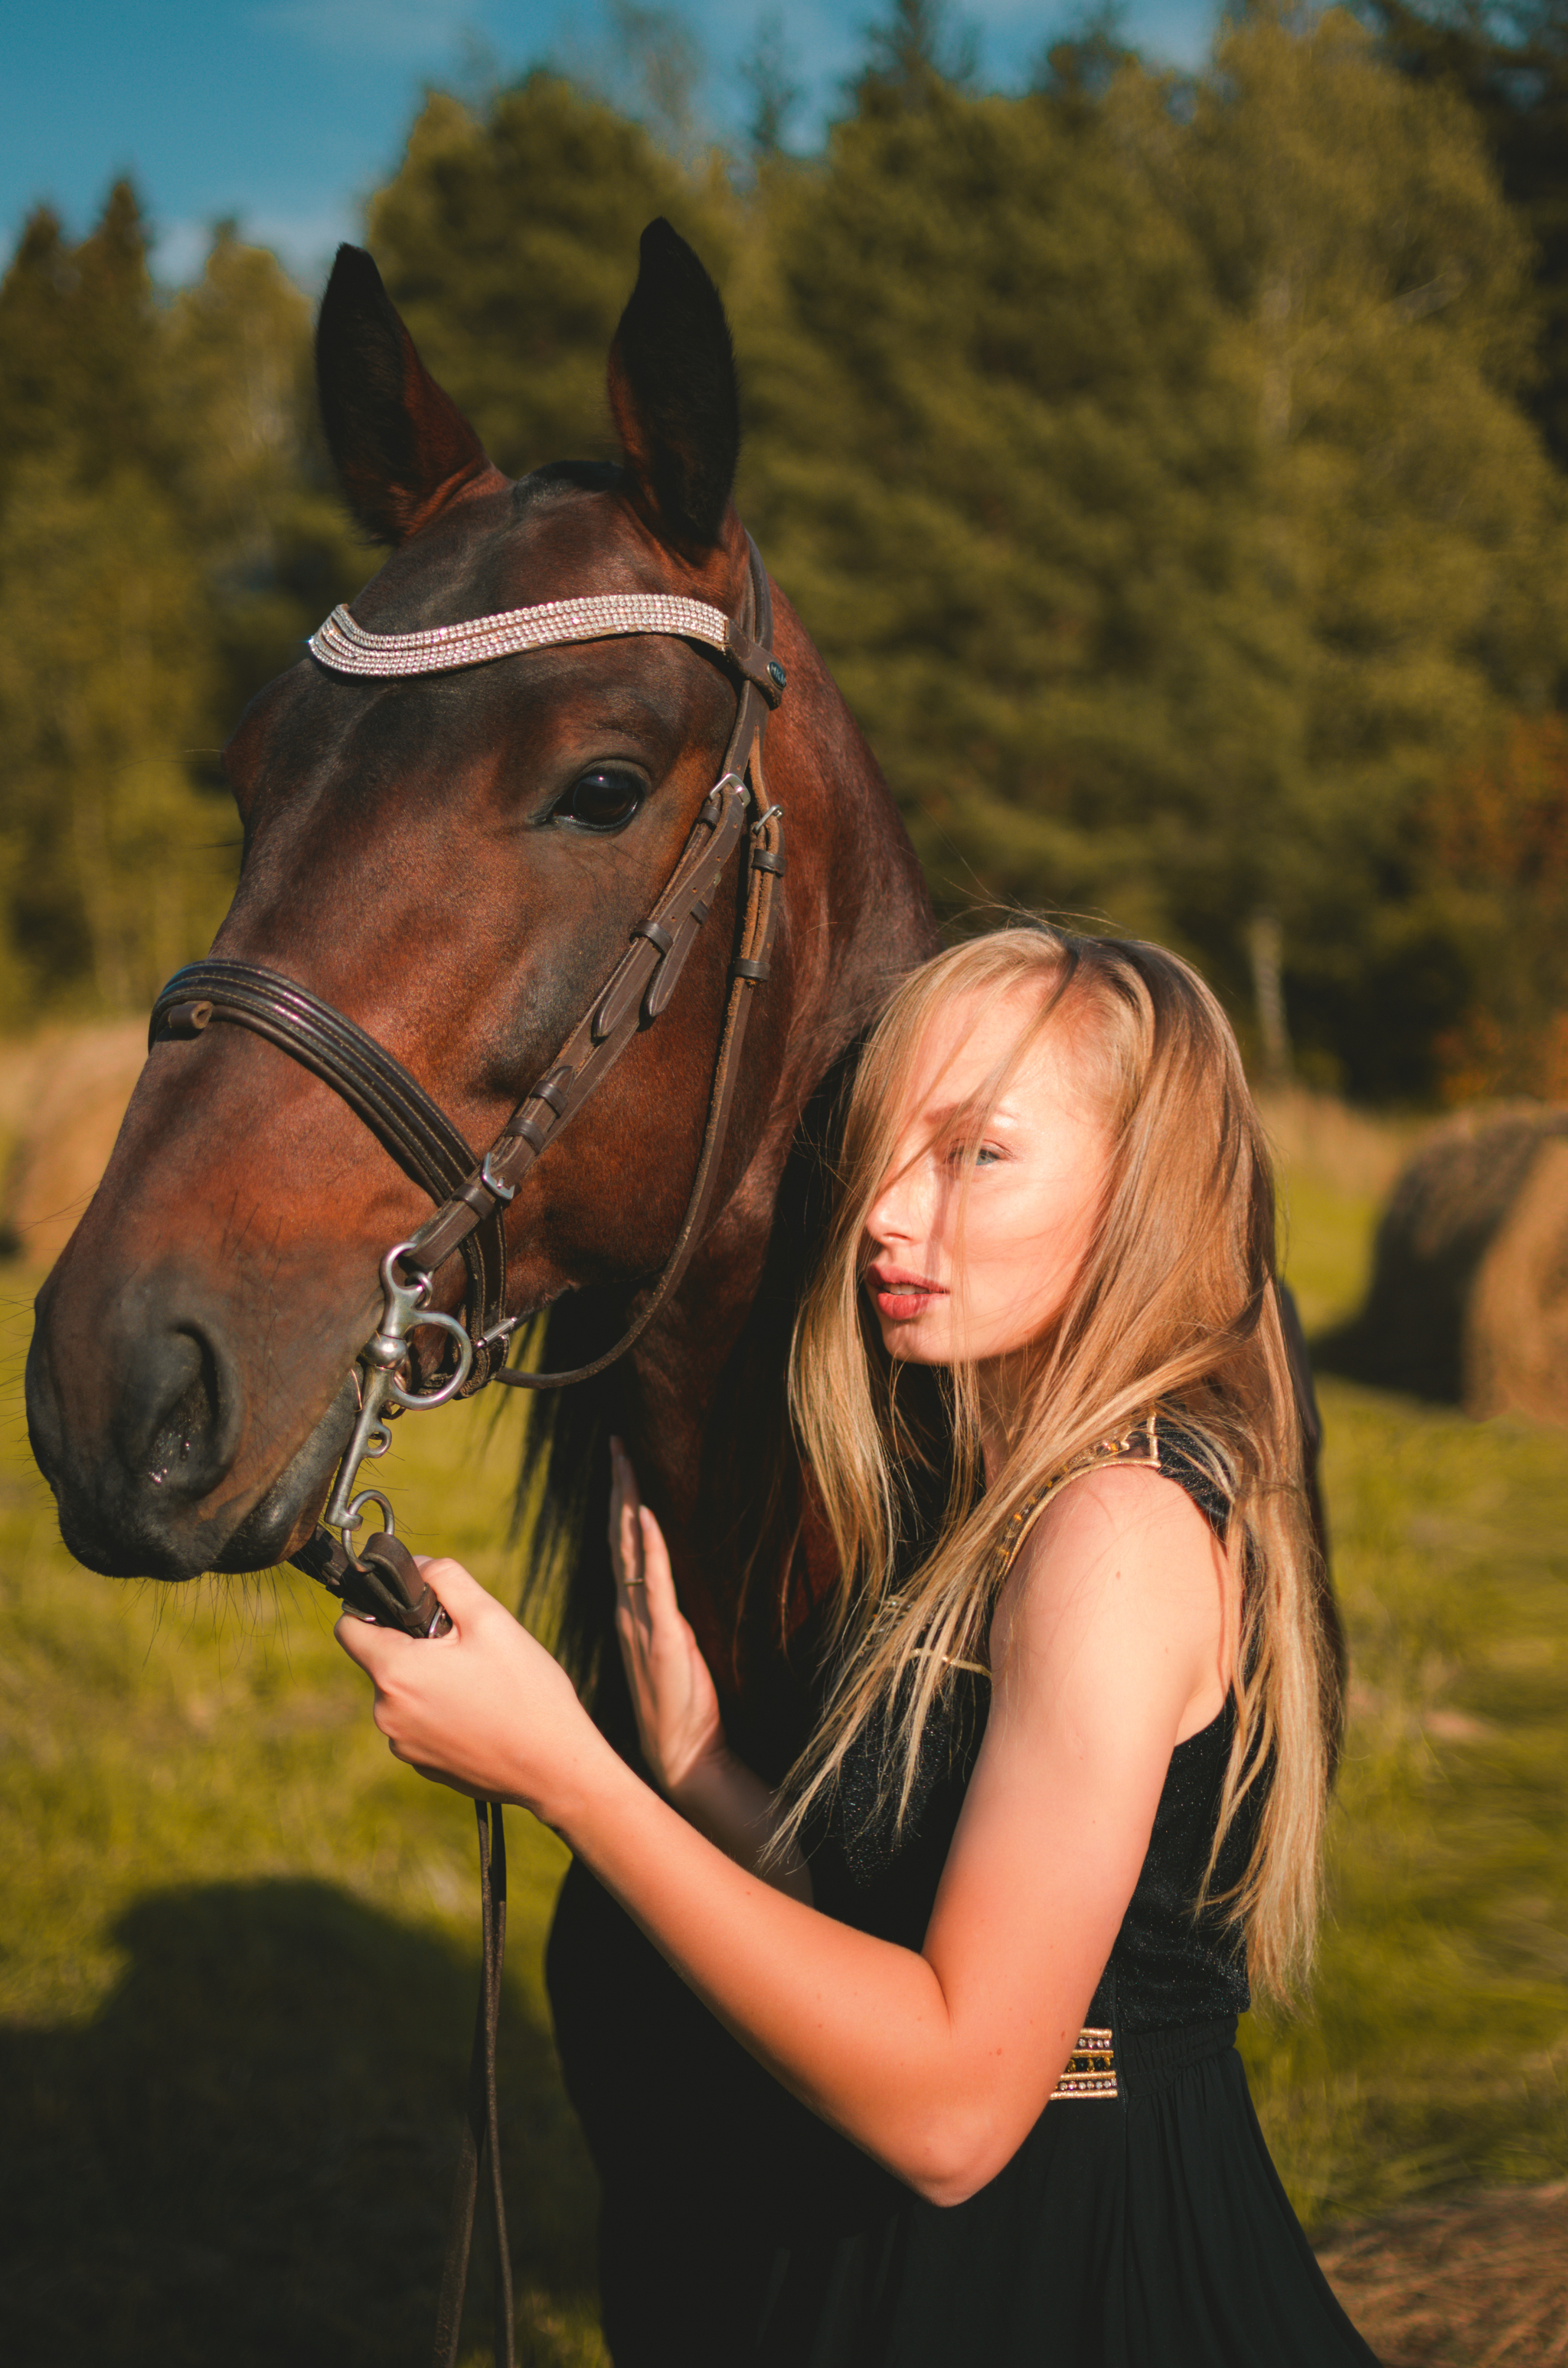 In the field with a horse - My, PHOTOSESSION, The photo, Field, Horses, Girls, Longpost